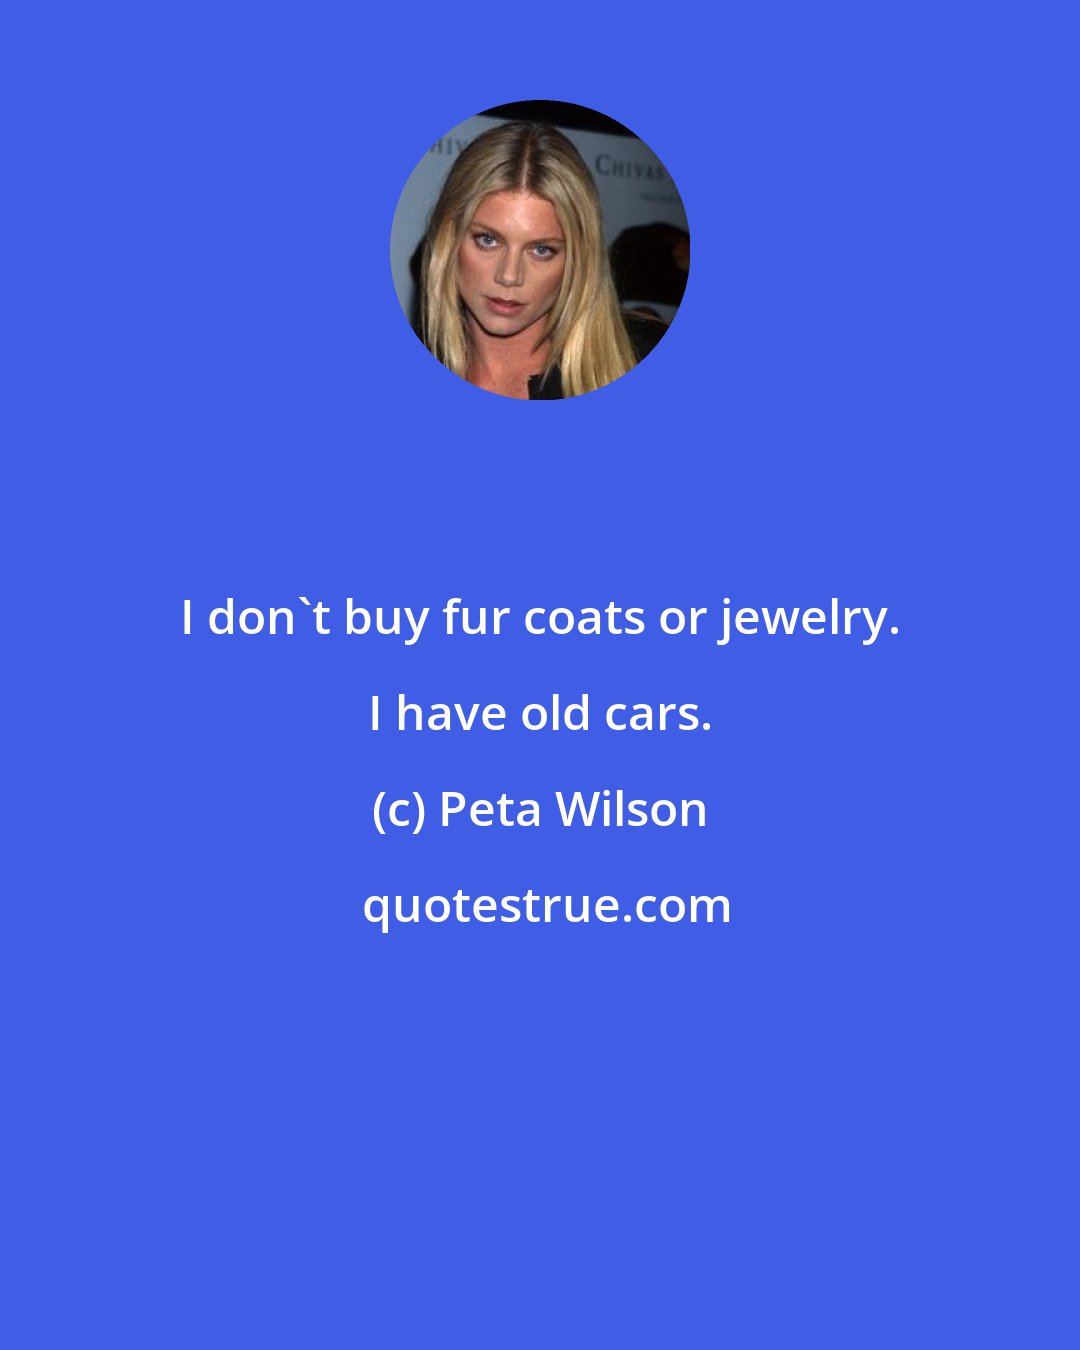 Peta Wilson: I don't buy fur coats or jewelry. I have old cars.